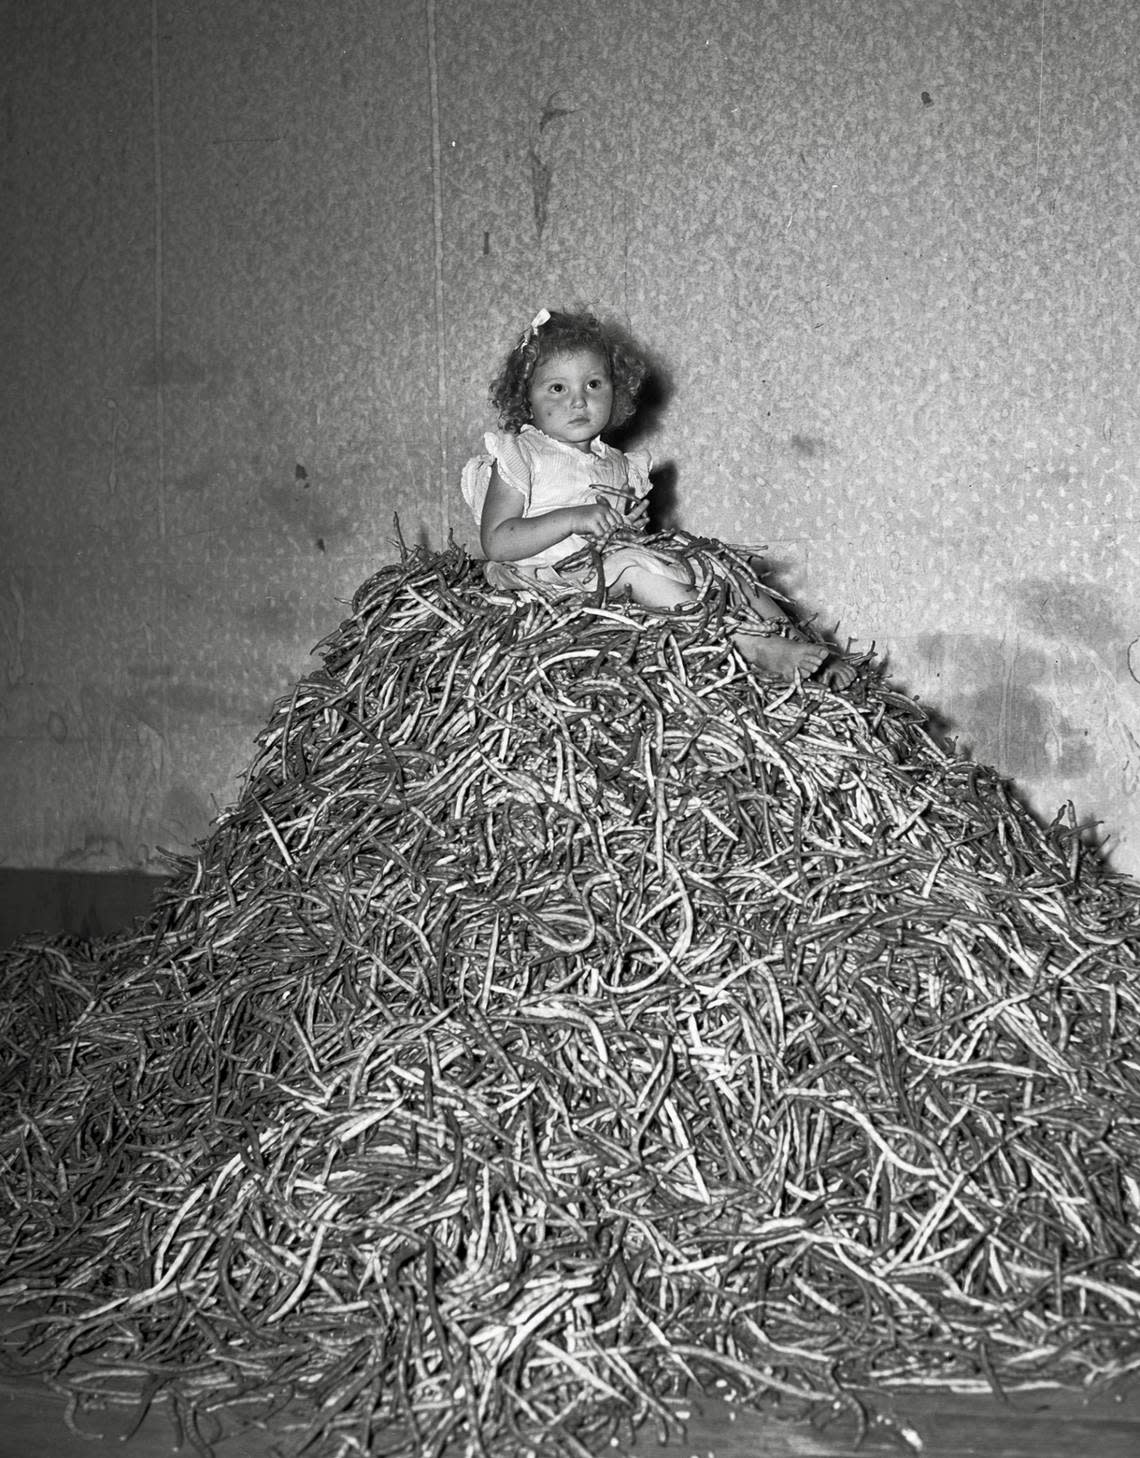 Addie Ruth Harris, two-and-a-half-year-old daughter of Mr. and Mrs. Otis O. Harris of Paradise, Texas, sits barefoot on a large pile of black-eyed peas brought to the Bridgeport market July 7, 1940.